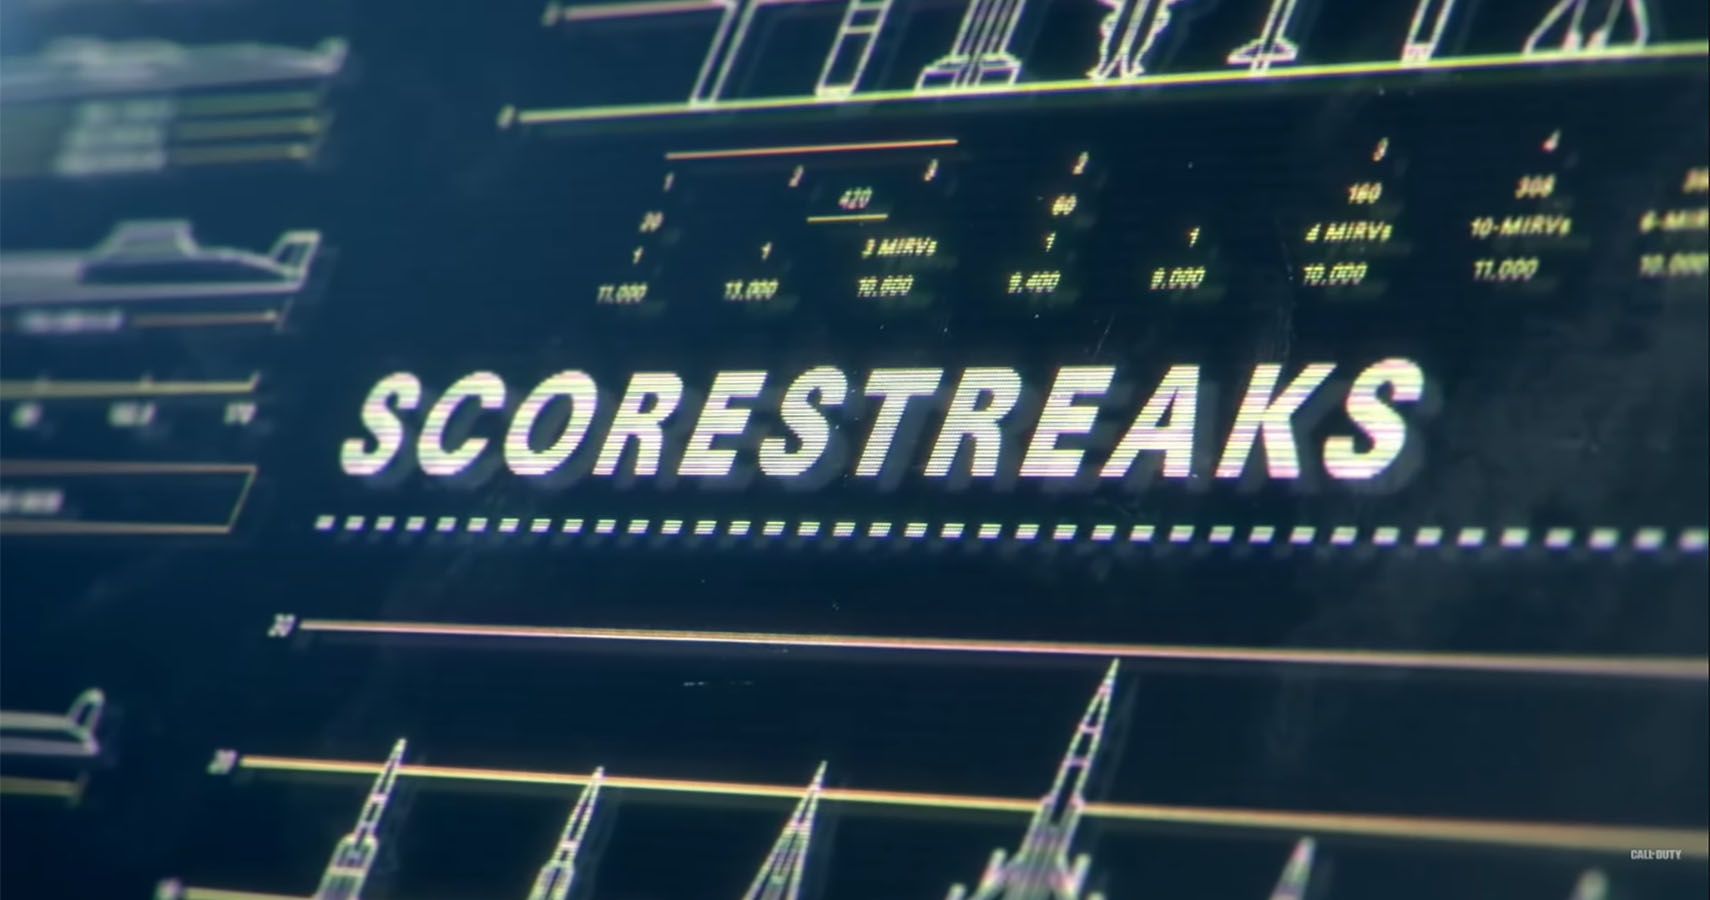 Official scorestreak graphic from Treyarch